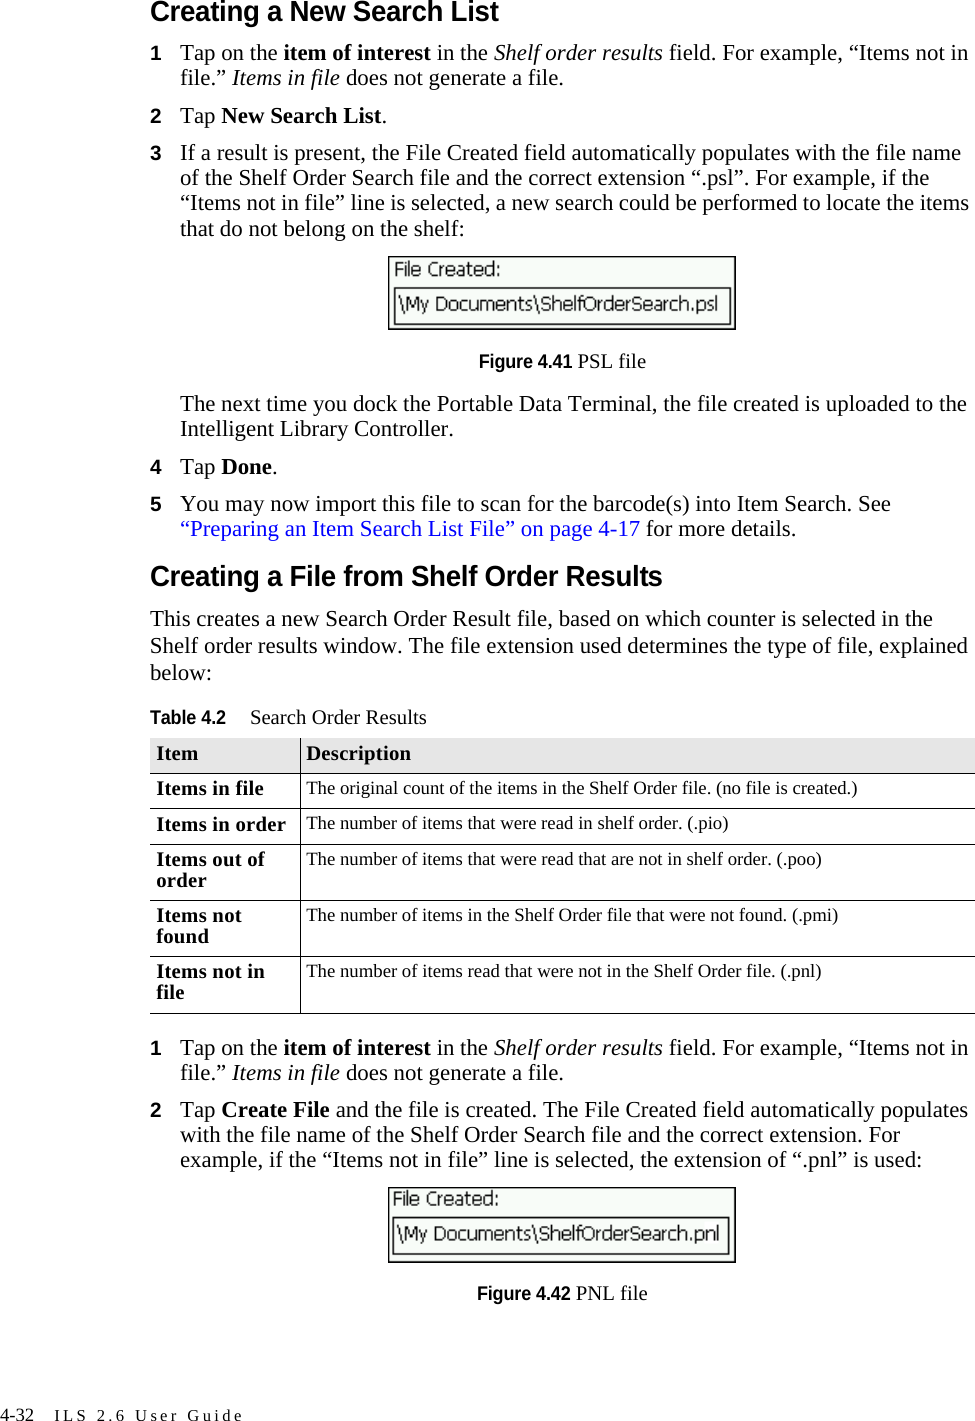 4-32 ILS 2.6 User GuideCreating a New Search List1Tap on the item of interest in the Shelf order results field. For example, “Items not in file.” Items in file does not generate a file.2Tap New Search List.3If a result is present, the File Created field automatically populates with the file name of the Shelf Order Search file and the correct extension “.psl”. For example, if the “Items not in file” line is selected, a new search could be performed to locate the items that do not belong on the shelf: Figure 4.41 PSL fileThe next time you dock the Portable Data Terminal, the file created is uploaded to the Intelligent Library Controller.4Tap Done.5You may now import this file to scan for the barcode(s) into Item Search. See “Preparing an Item Search List File” on page 4-17 for more details.Creating a File from Shelf Order ResultsThis creates a new Search Order Result file, based on which counter is selected in the Shelf order results window. The file extension used determines the type of file, explained below:1Tap on the item of interest in the Shelf order results field. For example, “Items not in file.” Items in file does not generate a file.2Tap Create File and the file is created. The File Created field automatically populates with the file name of the Shelf Order Search file and the correct extension. For example, if the “Items not in file” line is selected, the extension of “.pnl” is used: Figure 4.42 PNL fileTable 4.2Search Order ResultsItem DescriptionItems in file The original count of the items in the Shelf Order file. (no file is created.)Items in order The number of items that were read in shelf order. (.pio)Items out of order The number of items that were read that are not in shelf order. (.poo)Items not found The number of items in the Shelf Order file that were not found. (.pmi)Items not in file The number of items read that were not in the Shelf Order file. (.pnl)